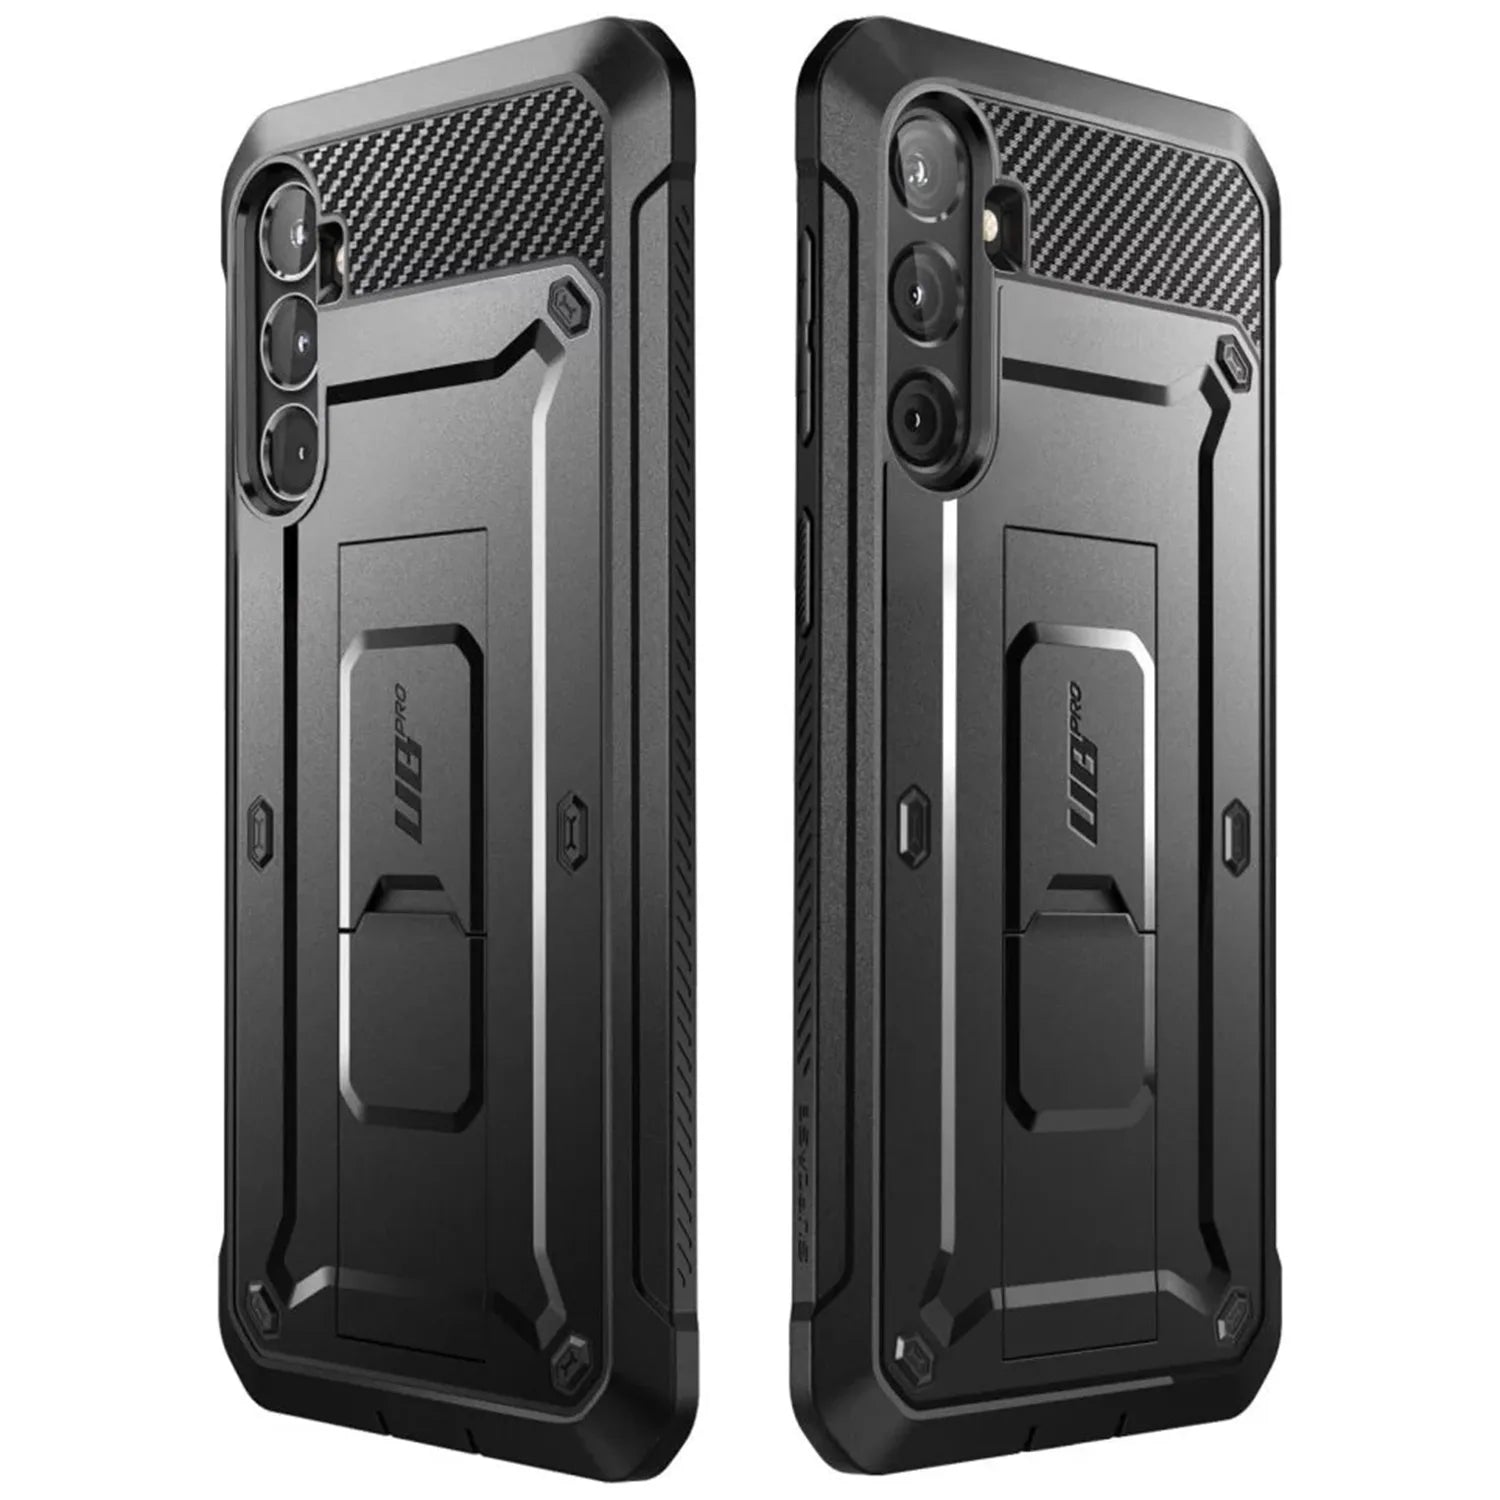 Supcase Unicorn Beetle Pro for Samsung Galaxy S23 FE (With Built-in Screen Protector), Black